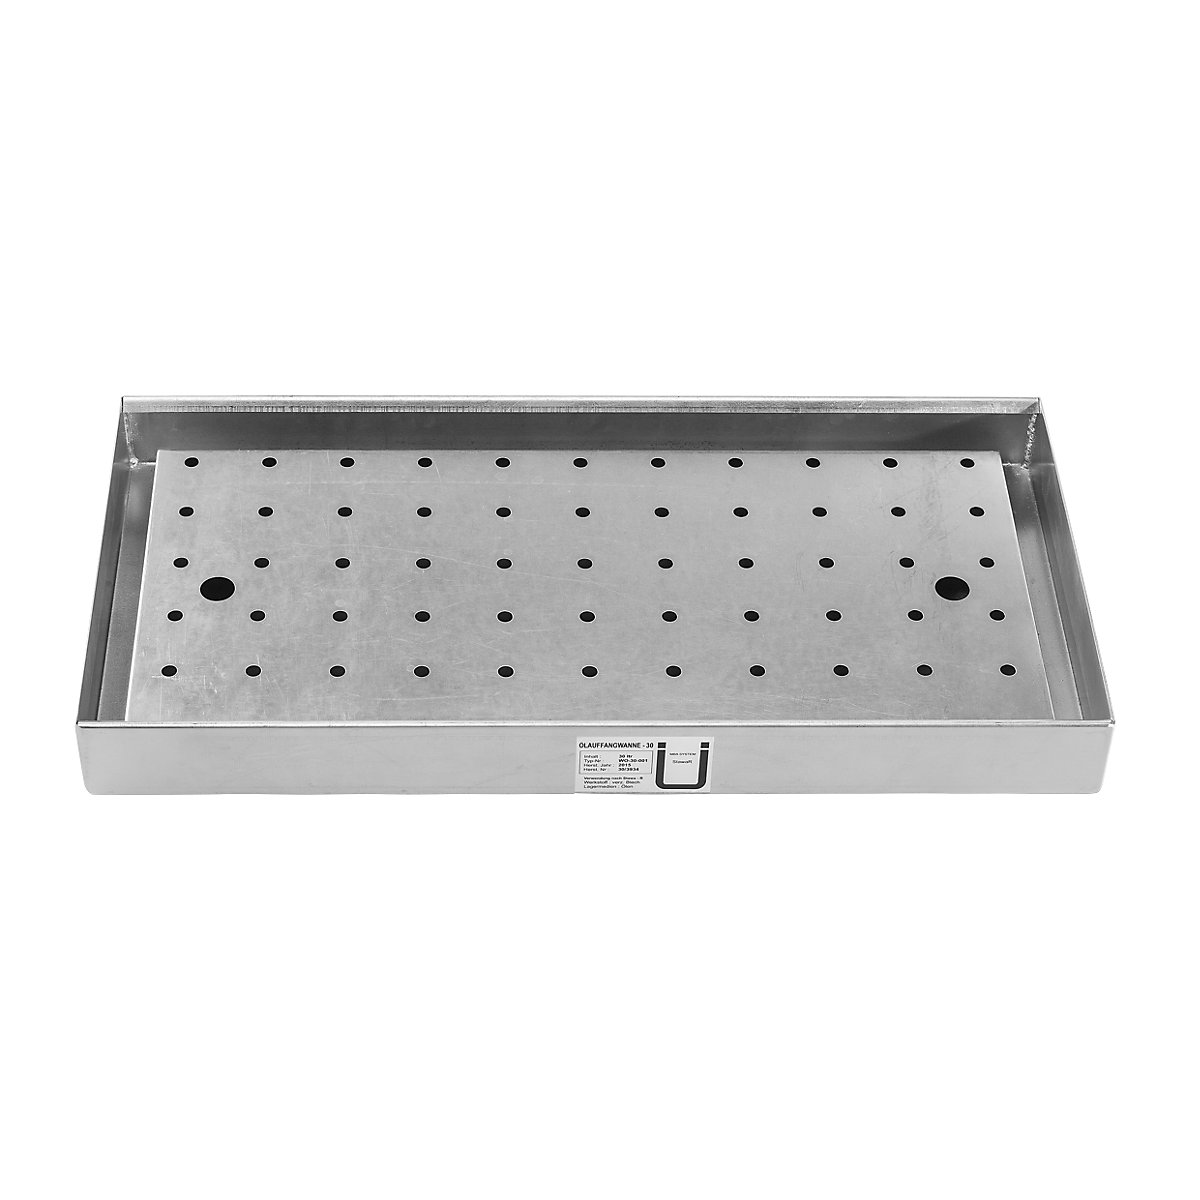 Perforated metal cover for tray shelf – eurokraft pro